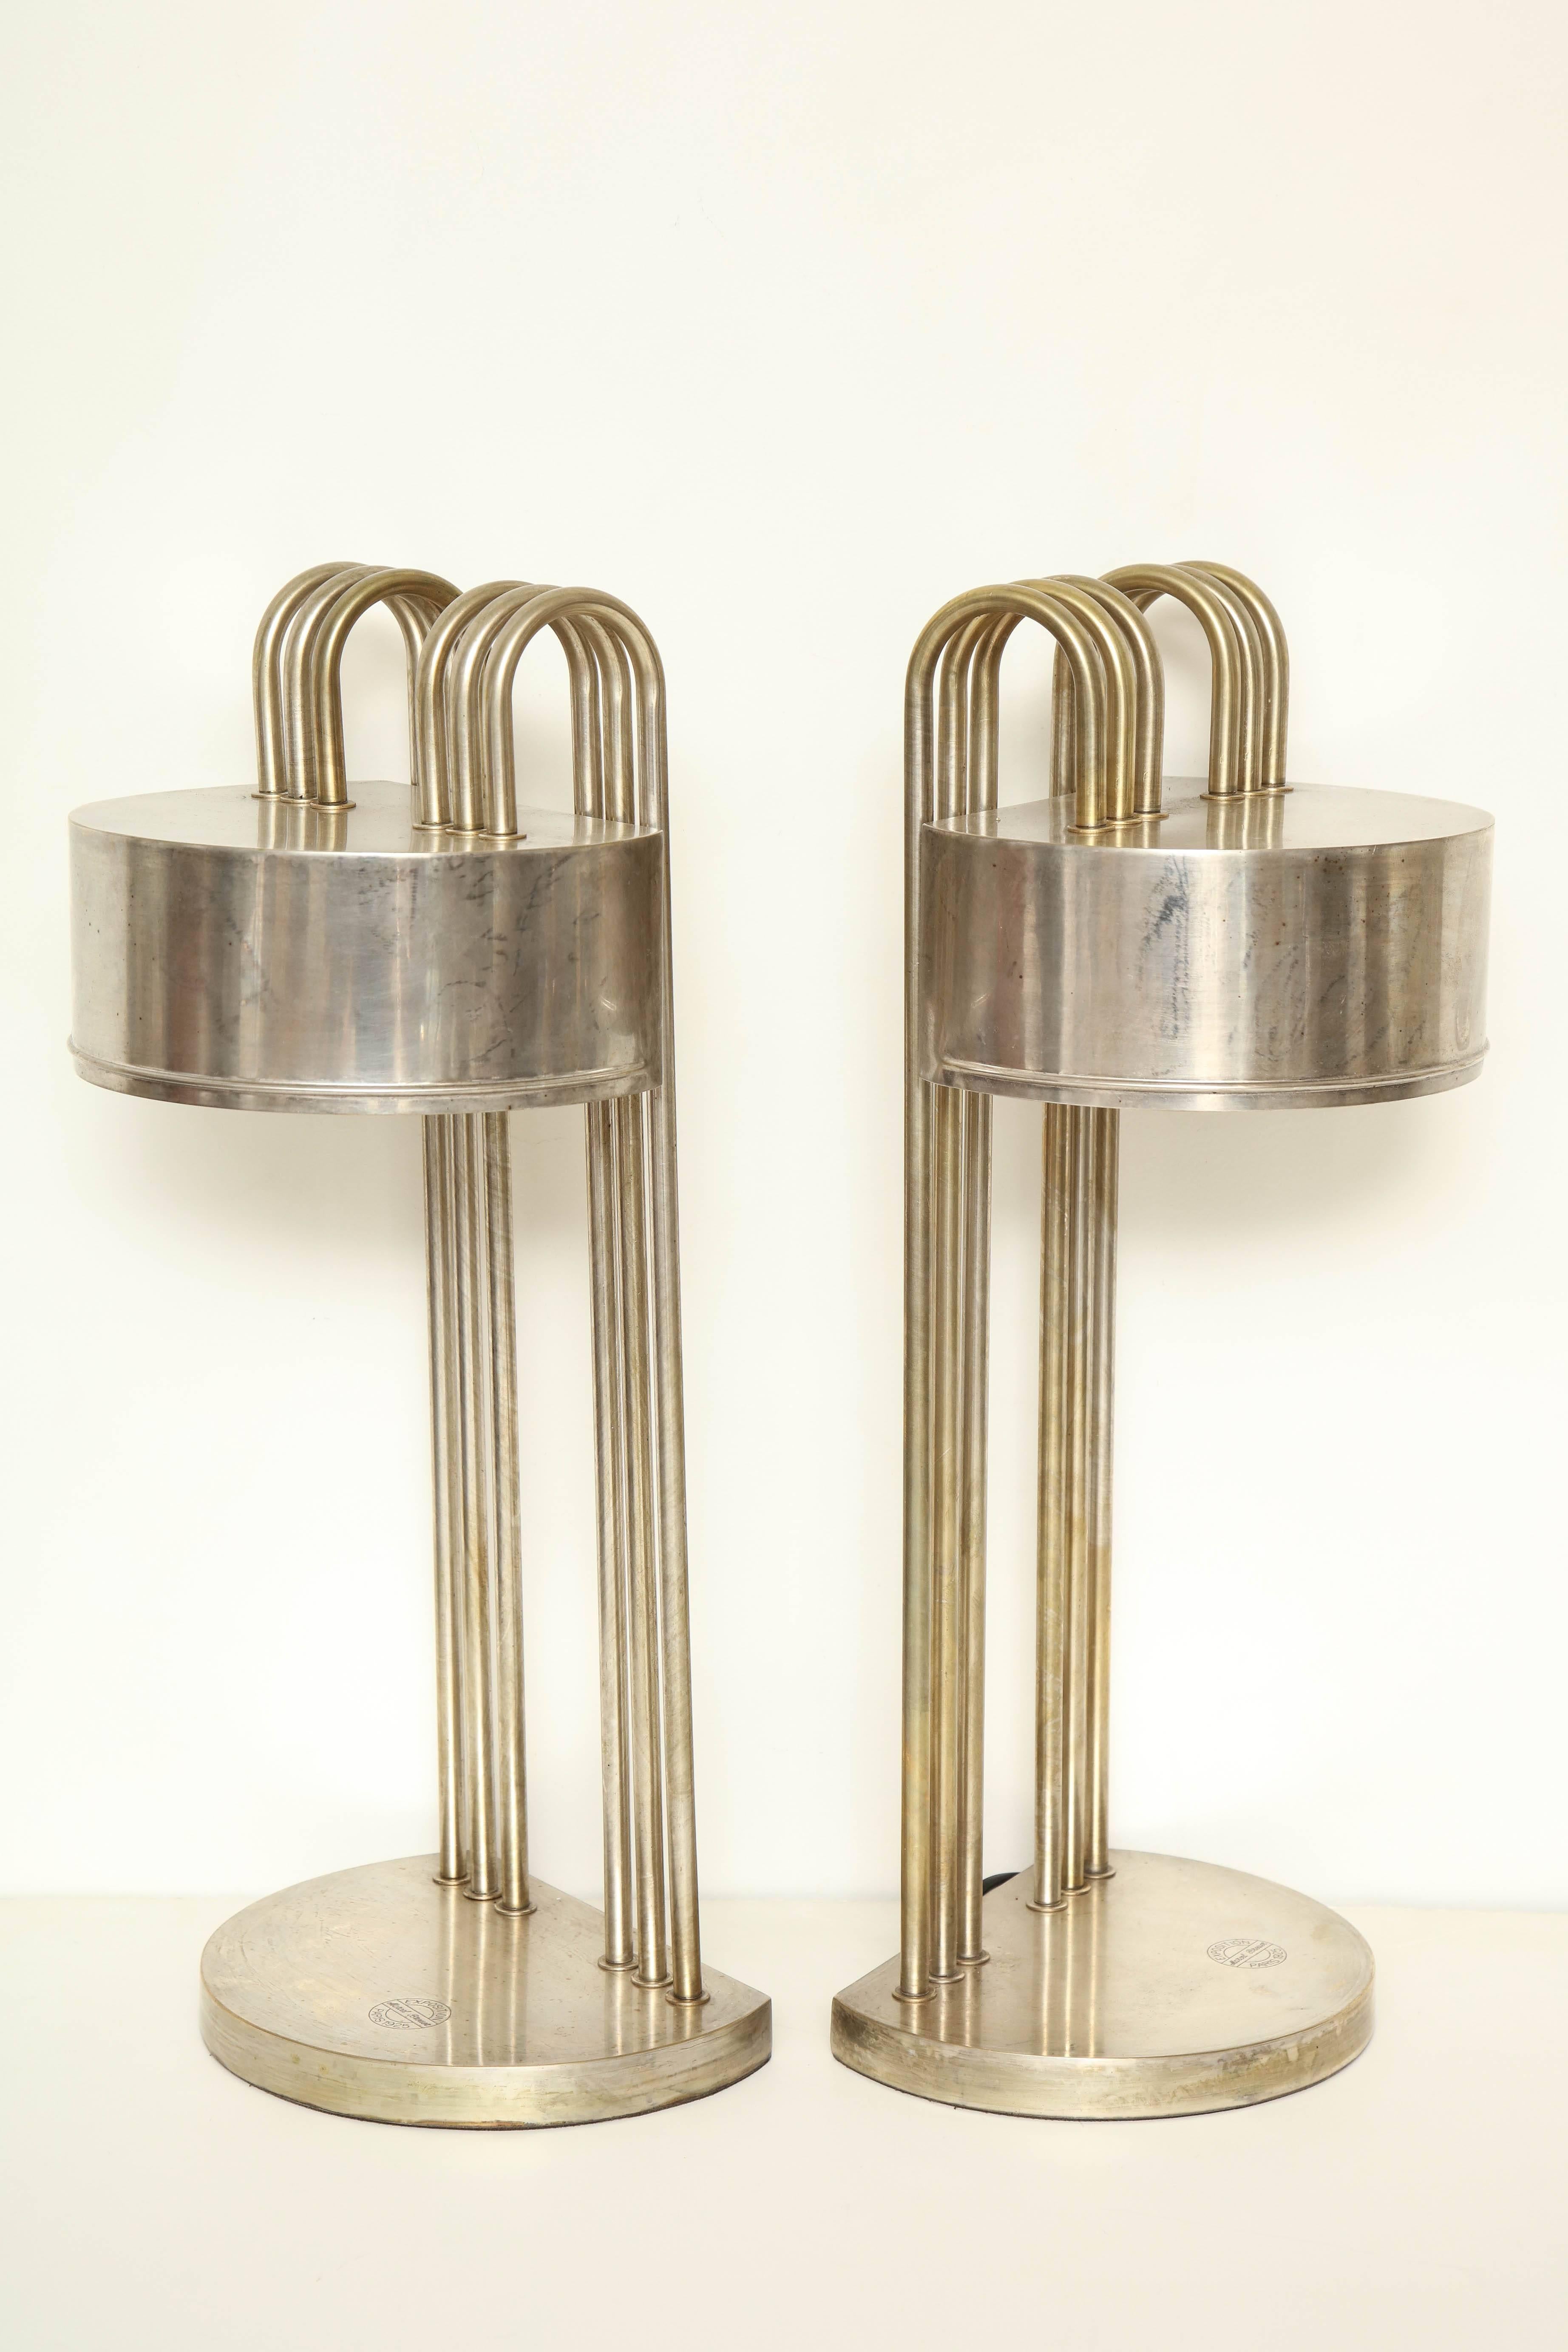 Early 20th Century Pair of Art Deco Metal Table Lamps by Marcel Breuer from Paris Exhibition, 1925